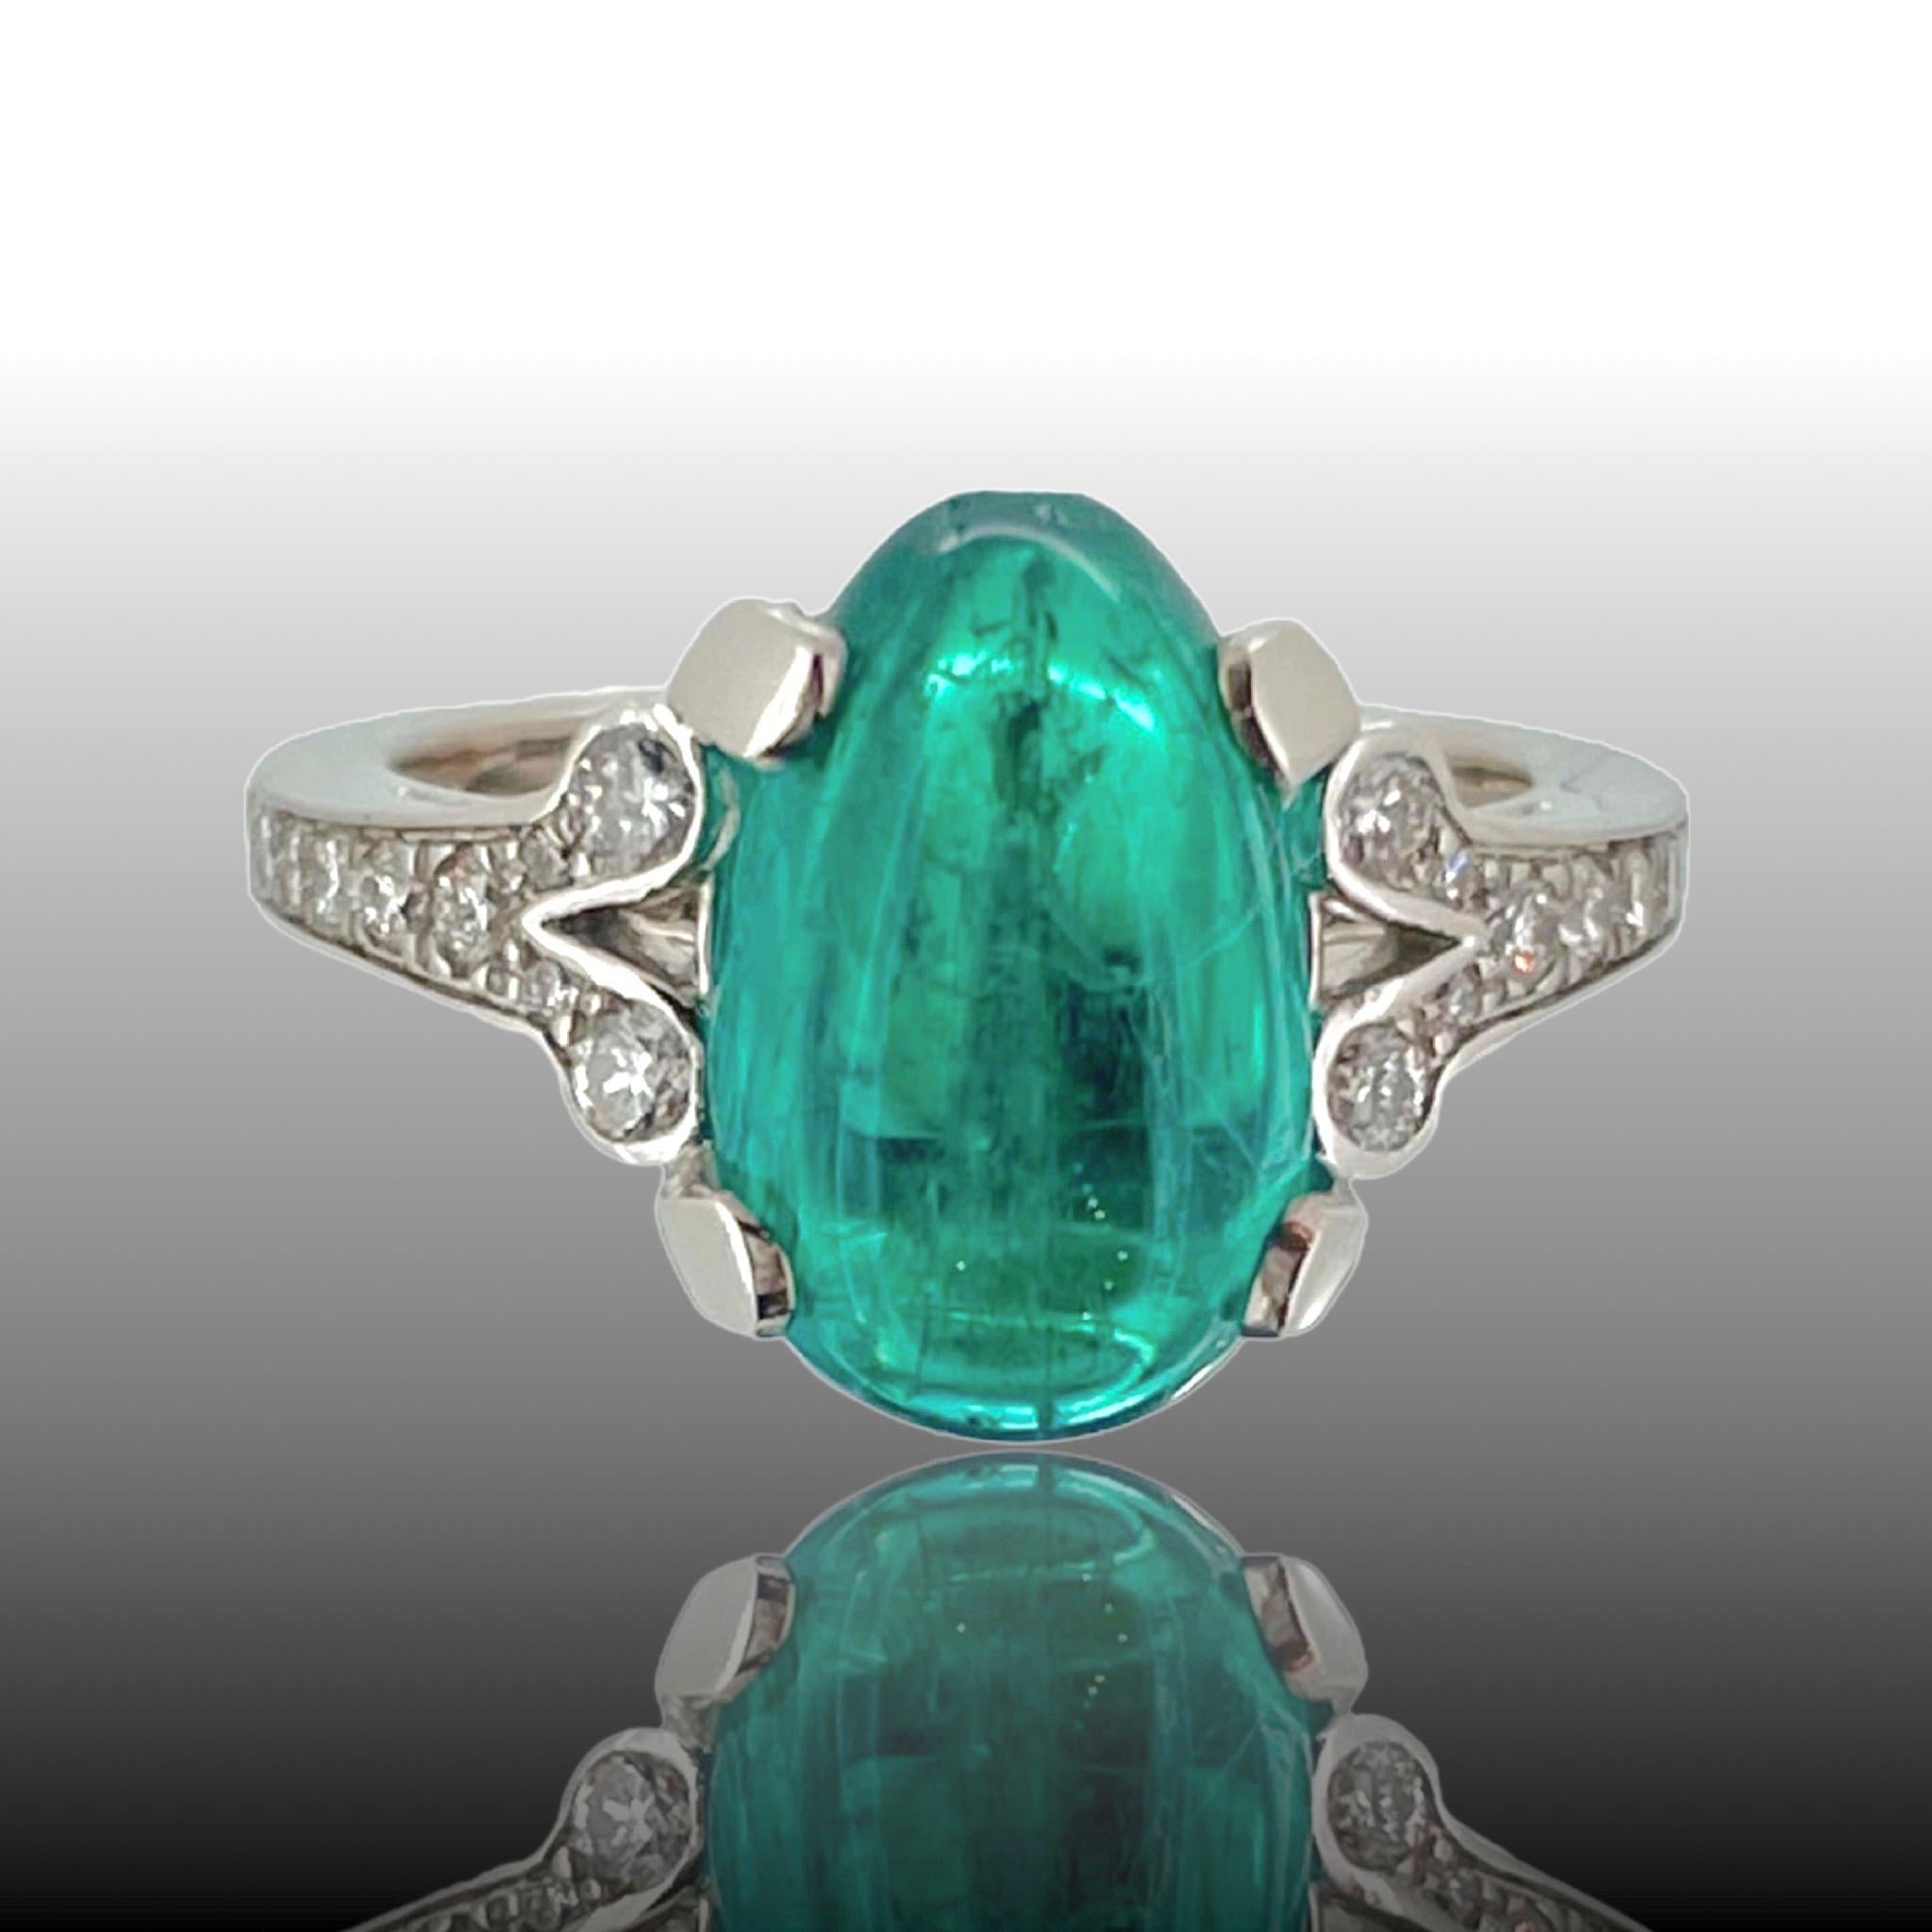 This beautiful ring is adorned with a 3.37ct Emerald from Colombia. It comes with a certificate from MGL. The ring is shouldered with brilliant cut diamonds and it is in excellent condition. The ring is made in platinum and it is marked with the